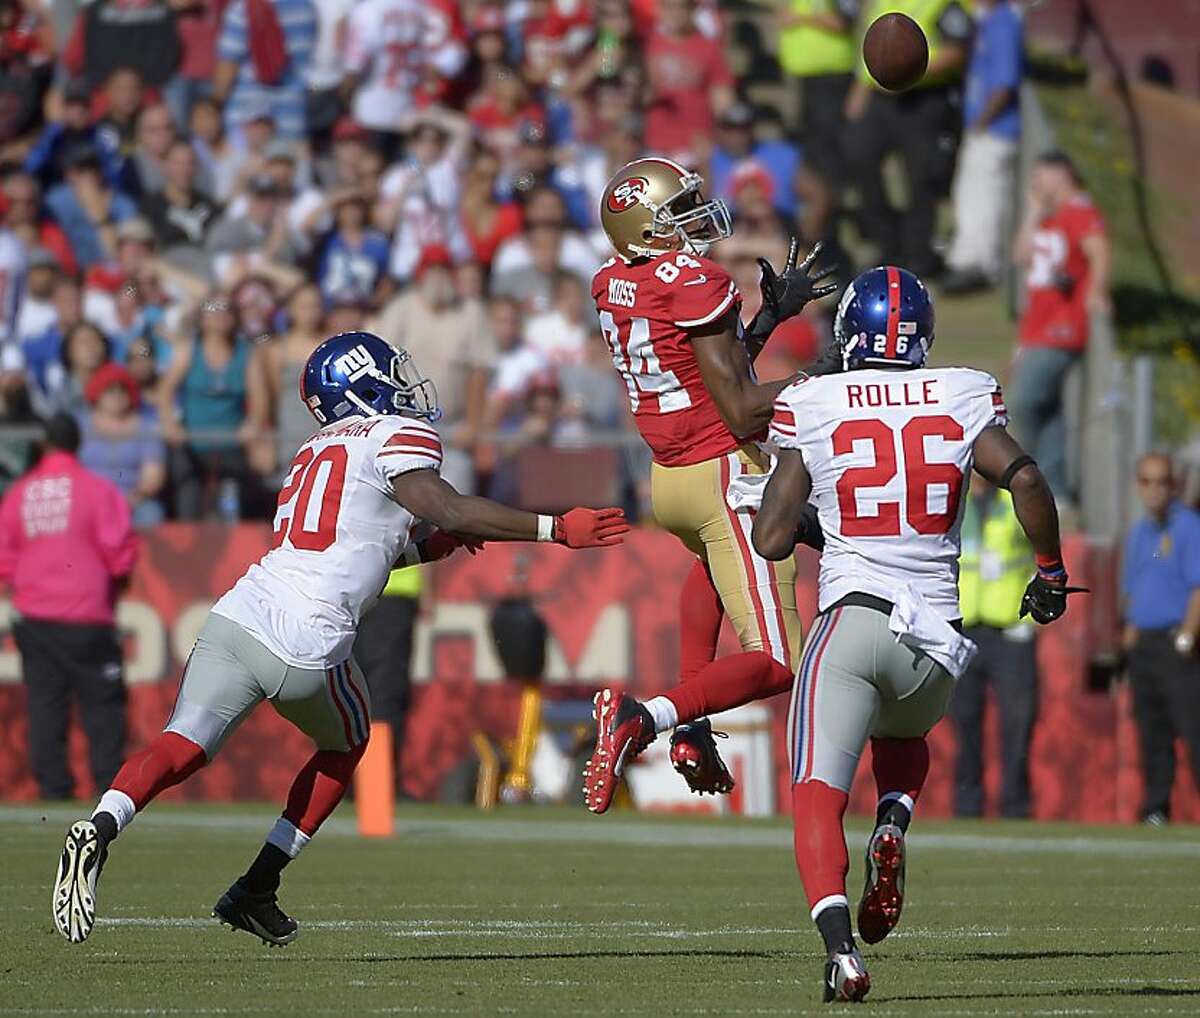 San Francisco 49ers wide receiver Randy Moss (84) catches a pass over New York Giants cornerback Prince Amukamara (20) and free safety Antrel Rolle (26) during the third quarter of an NFL football game in San Francisco, Sunday, Oct. 14, 2012. (AP Photo/Mark J. Terrill)